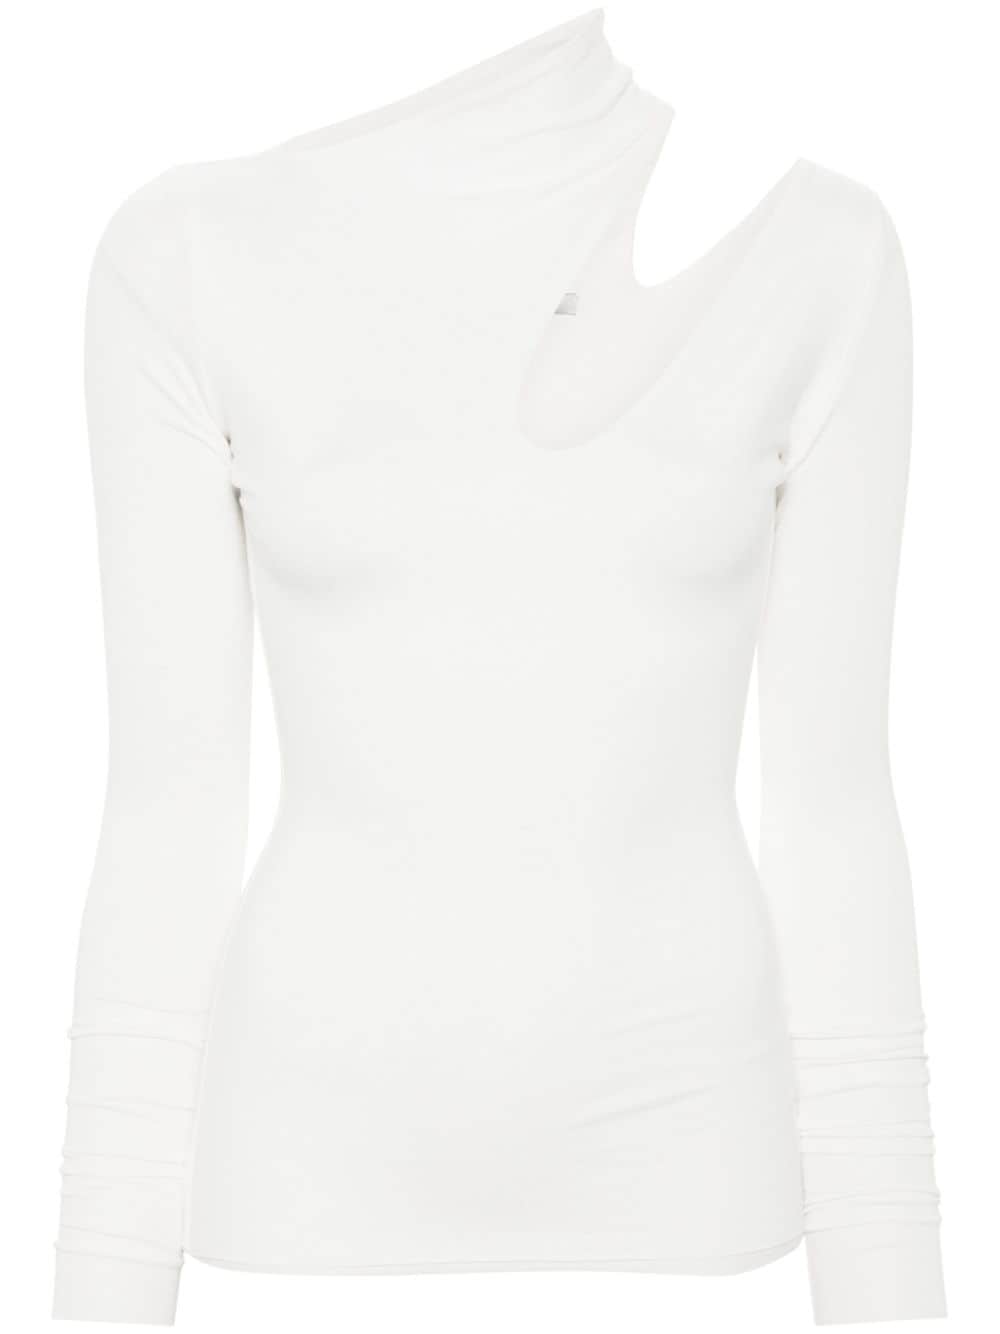 Manurí Bambina Cut-out Detail Top In White